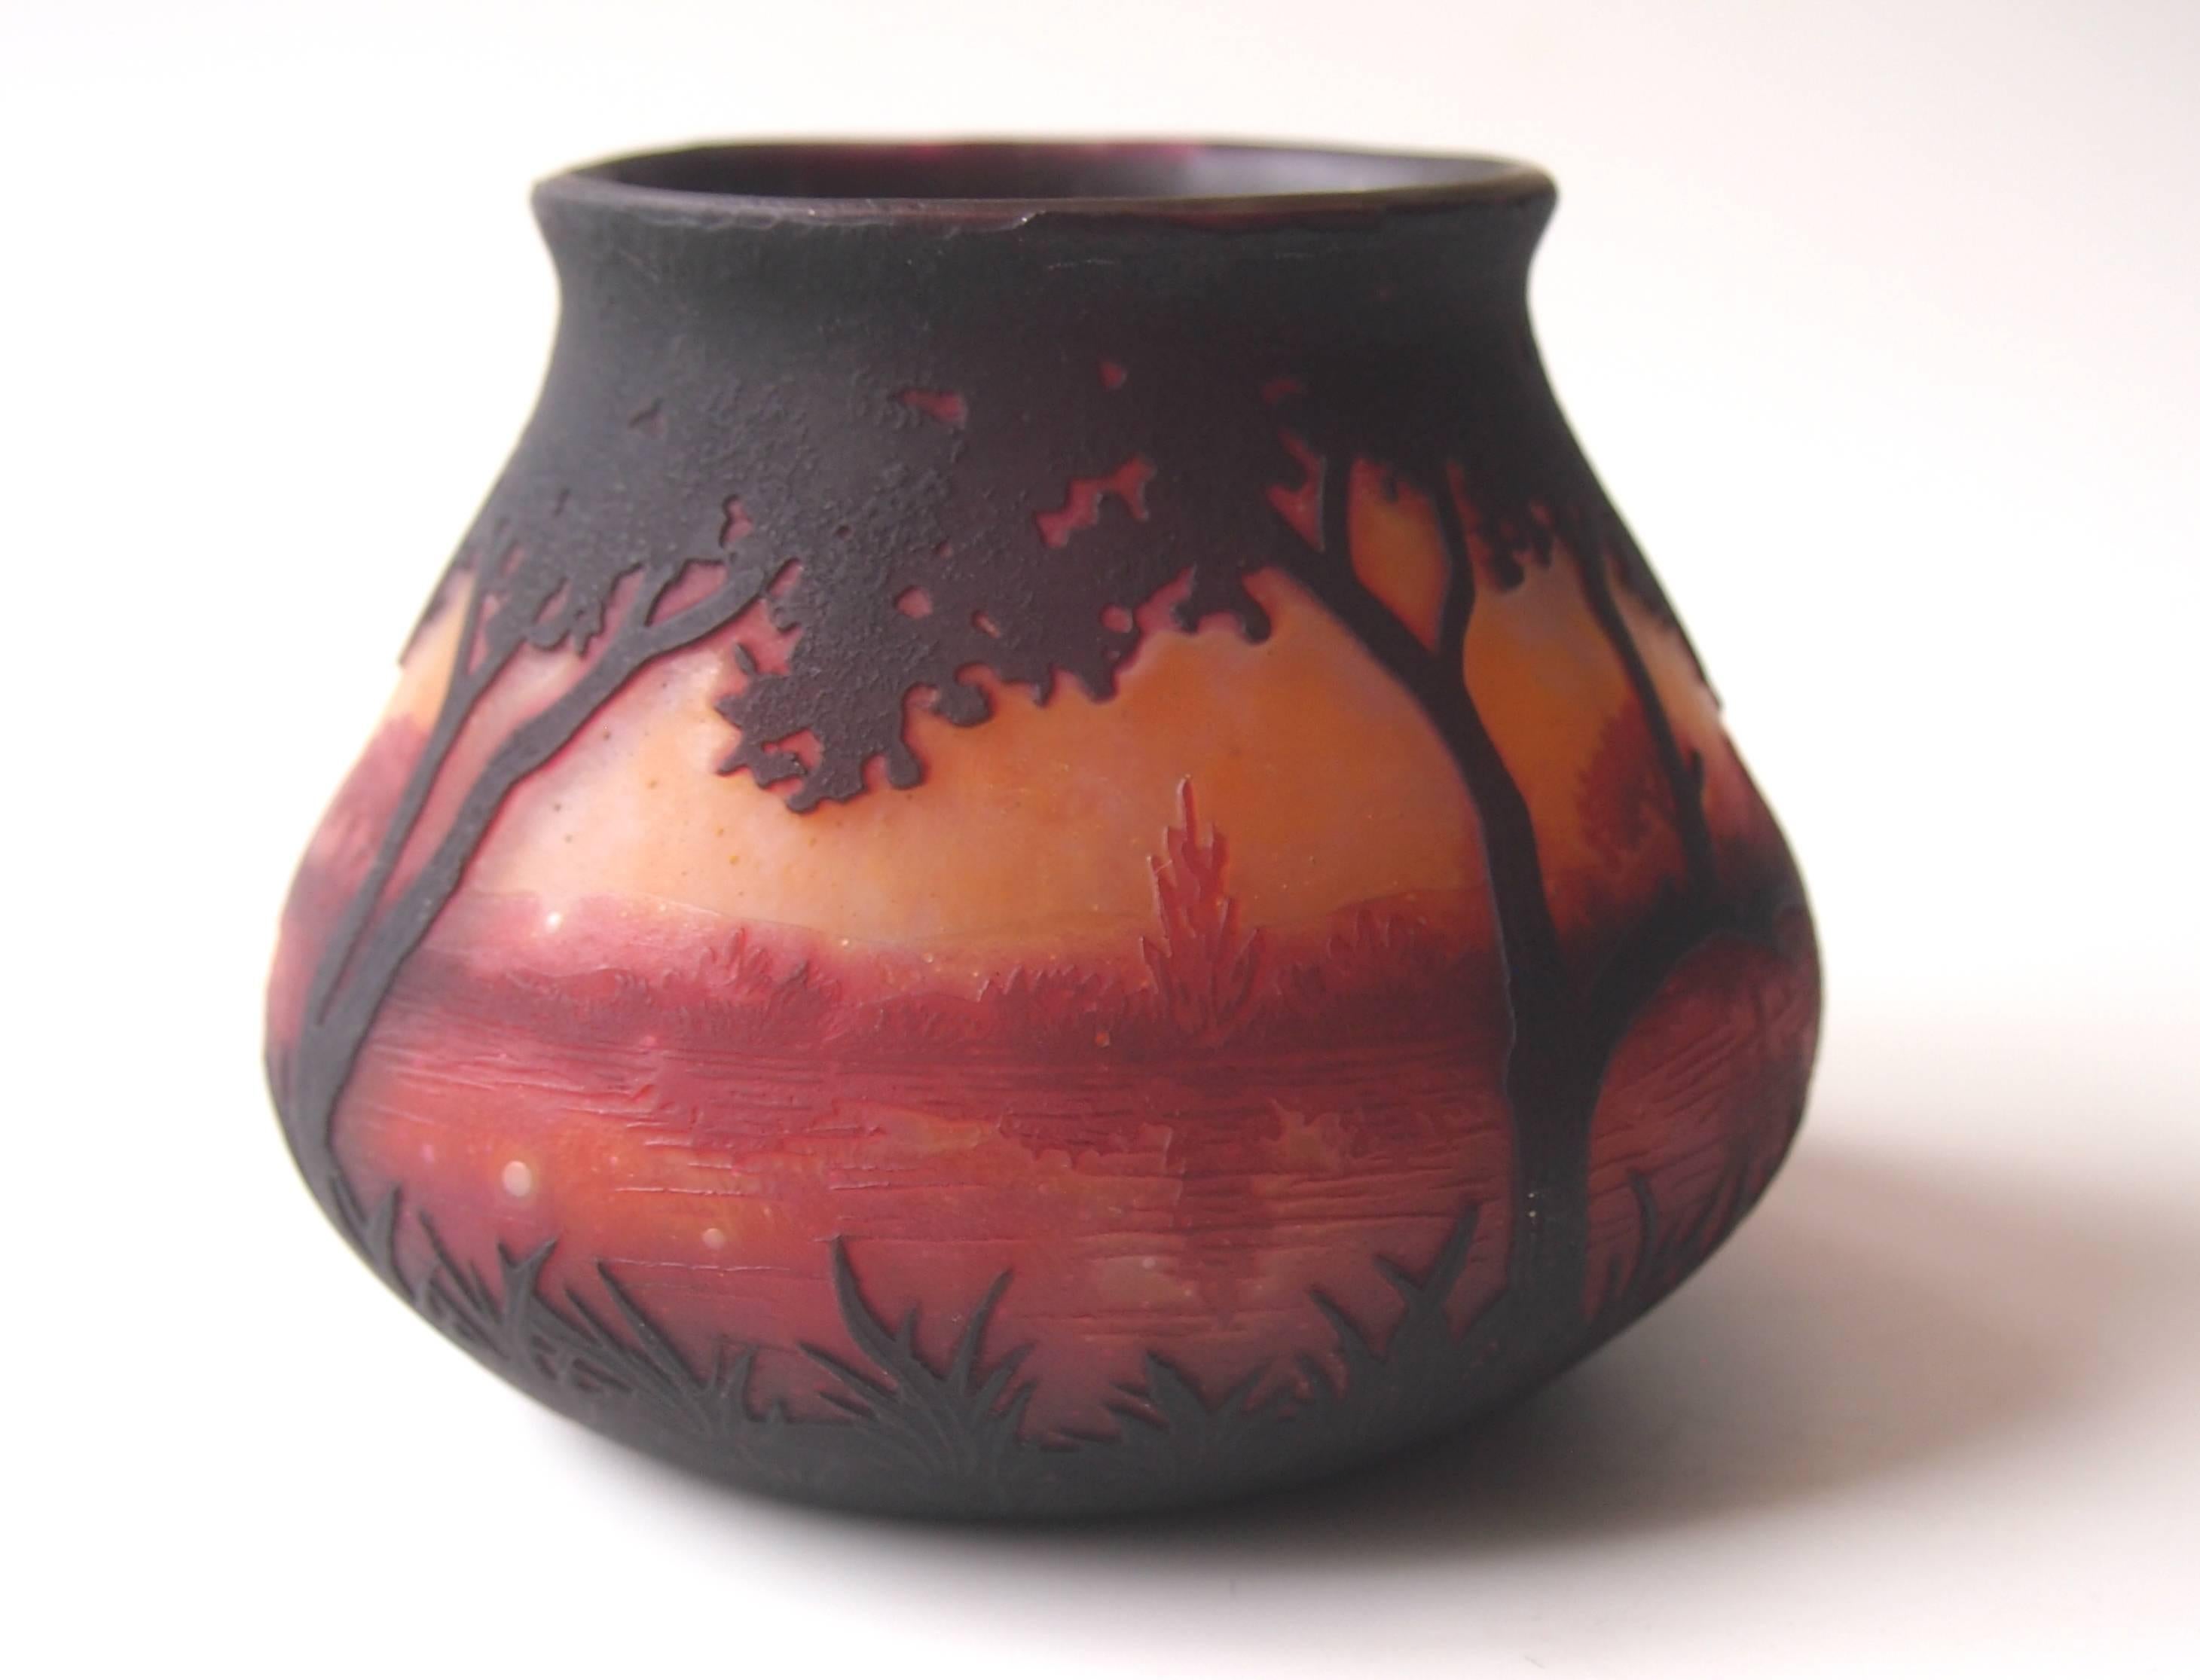 A stunning small, Art Nouveau Daum landscape cameo vase, in orange, browns and blacks depicting a tropical looking aquatic landscape. This vase was a personal gift from Antonin Daum (head of Daum at the time) to a friend and senior Emile Galle